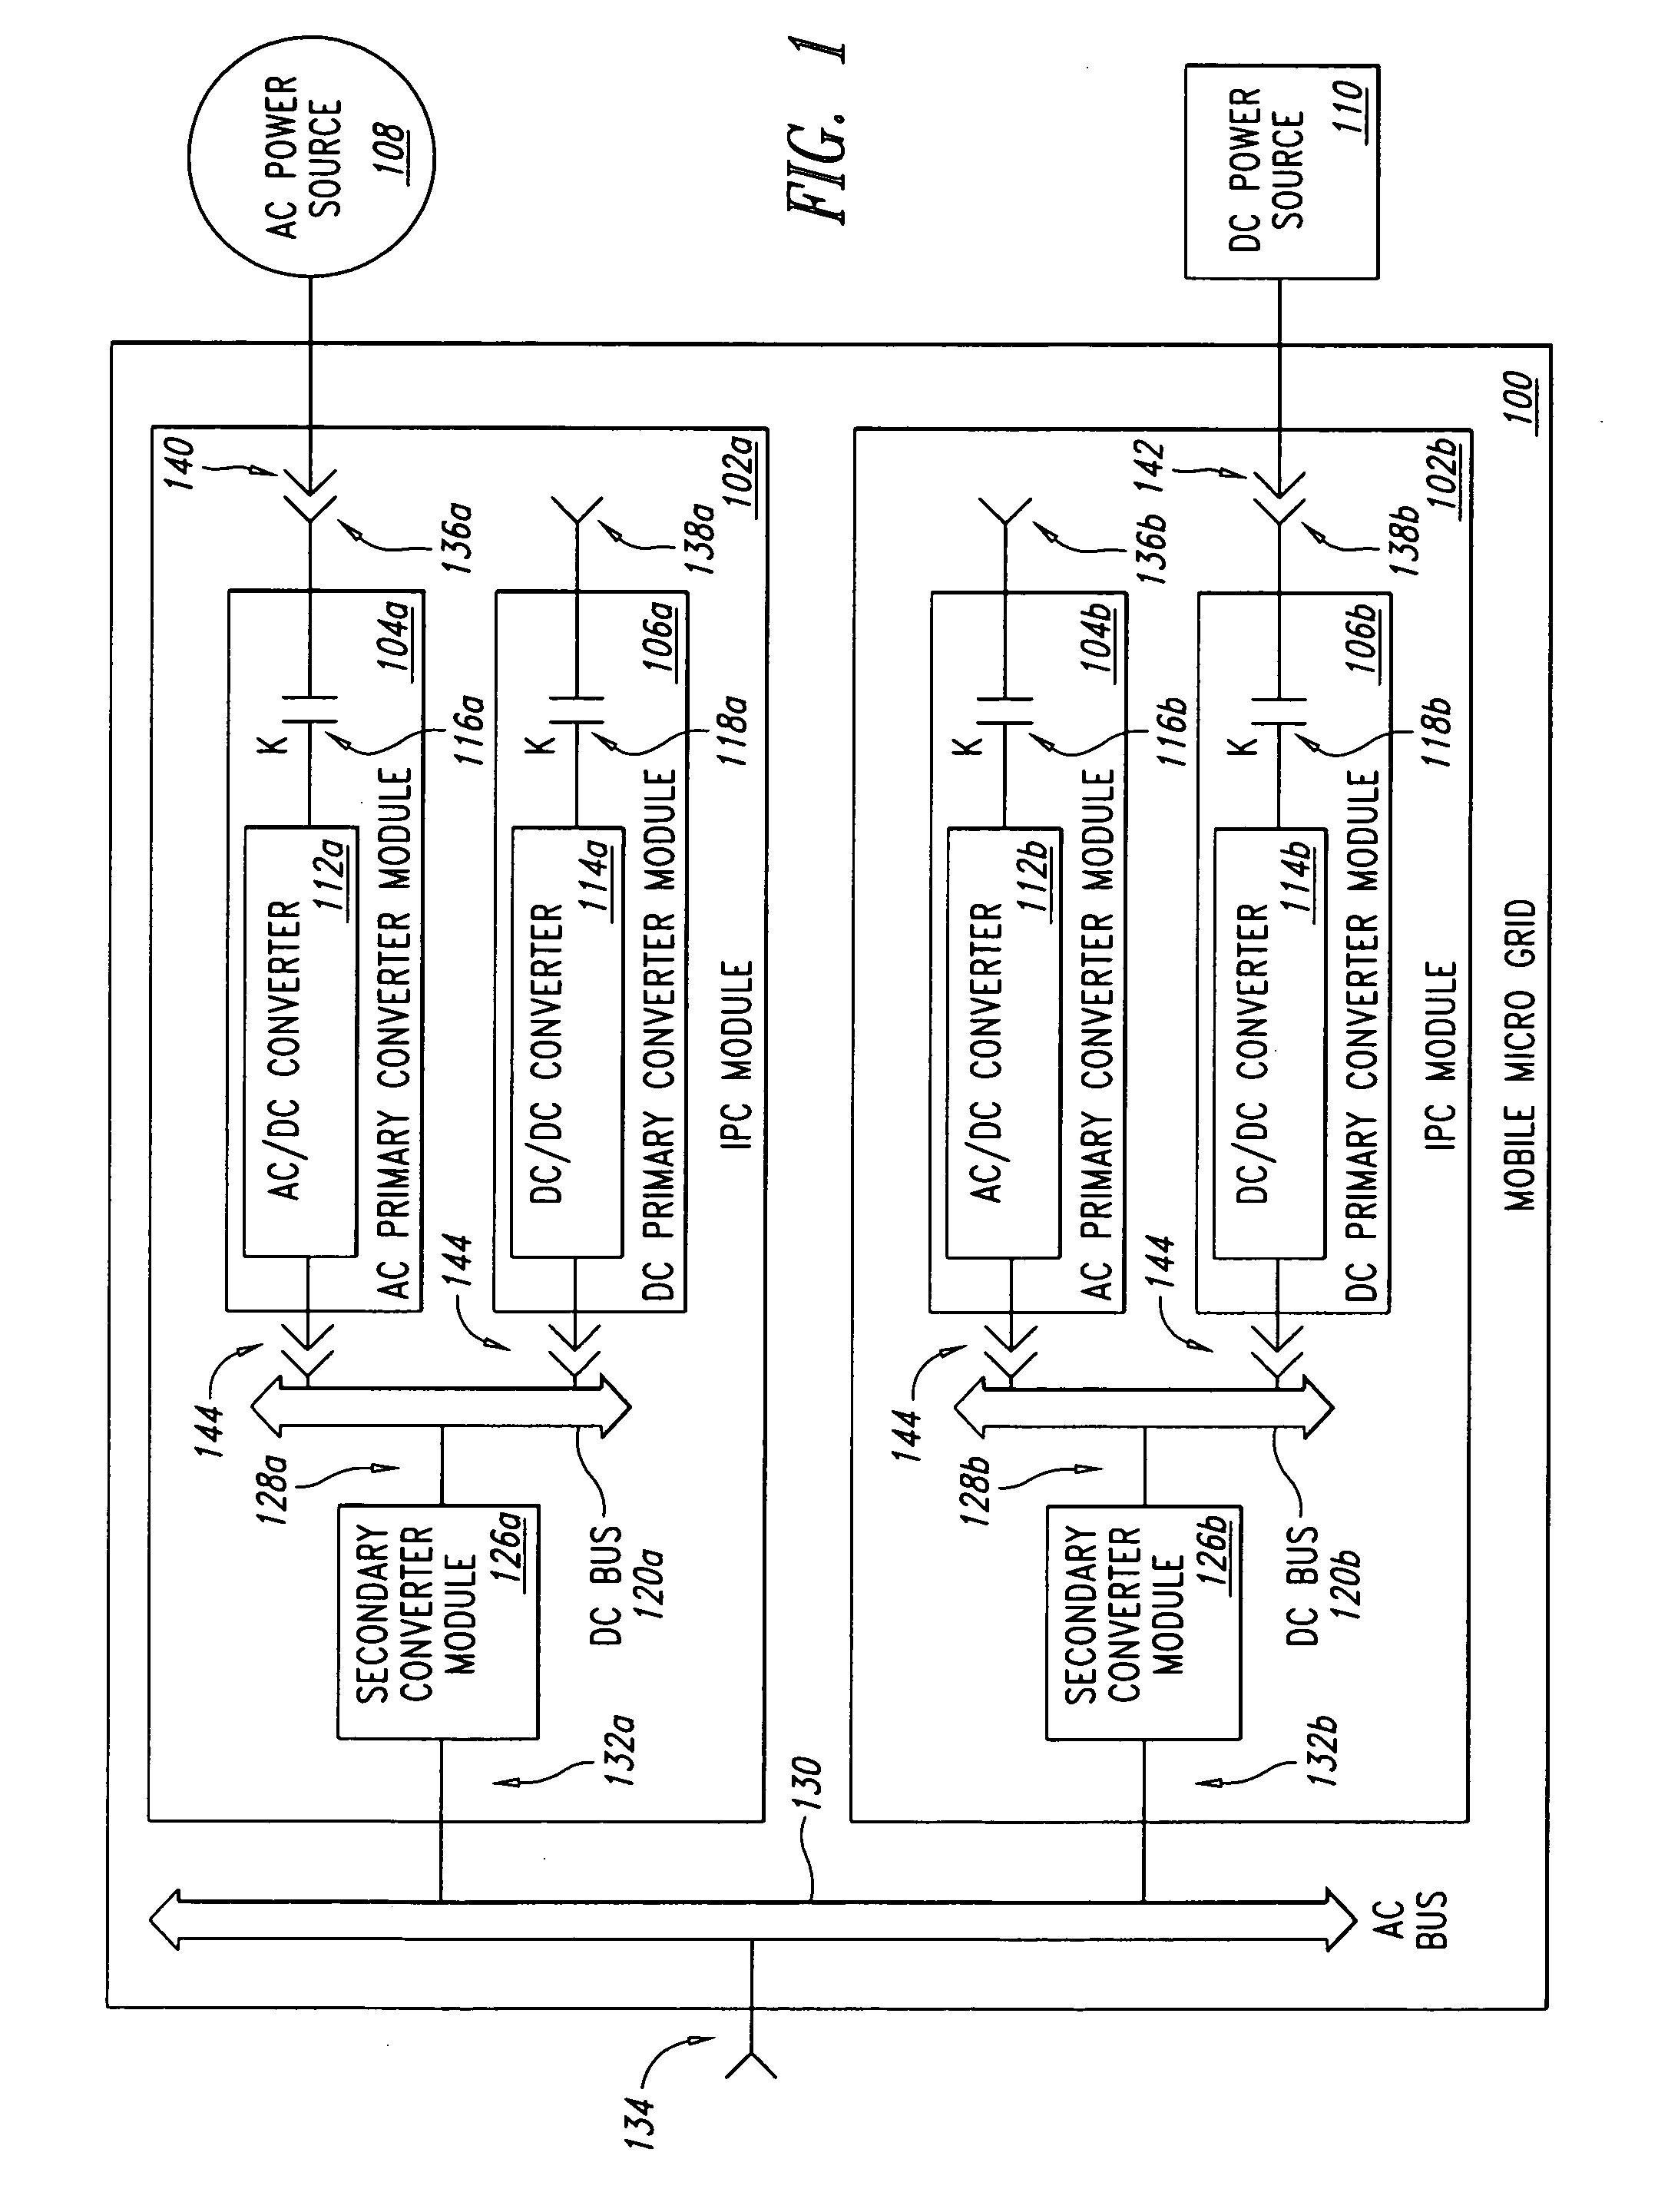 System and method for a power system micro grid